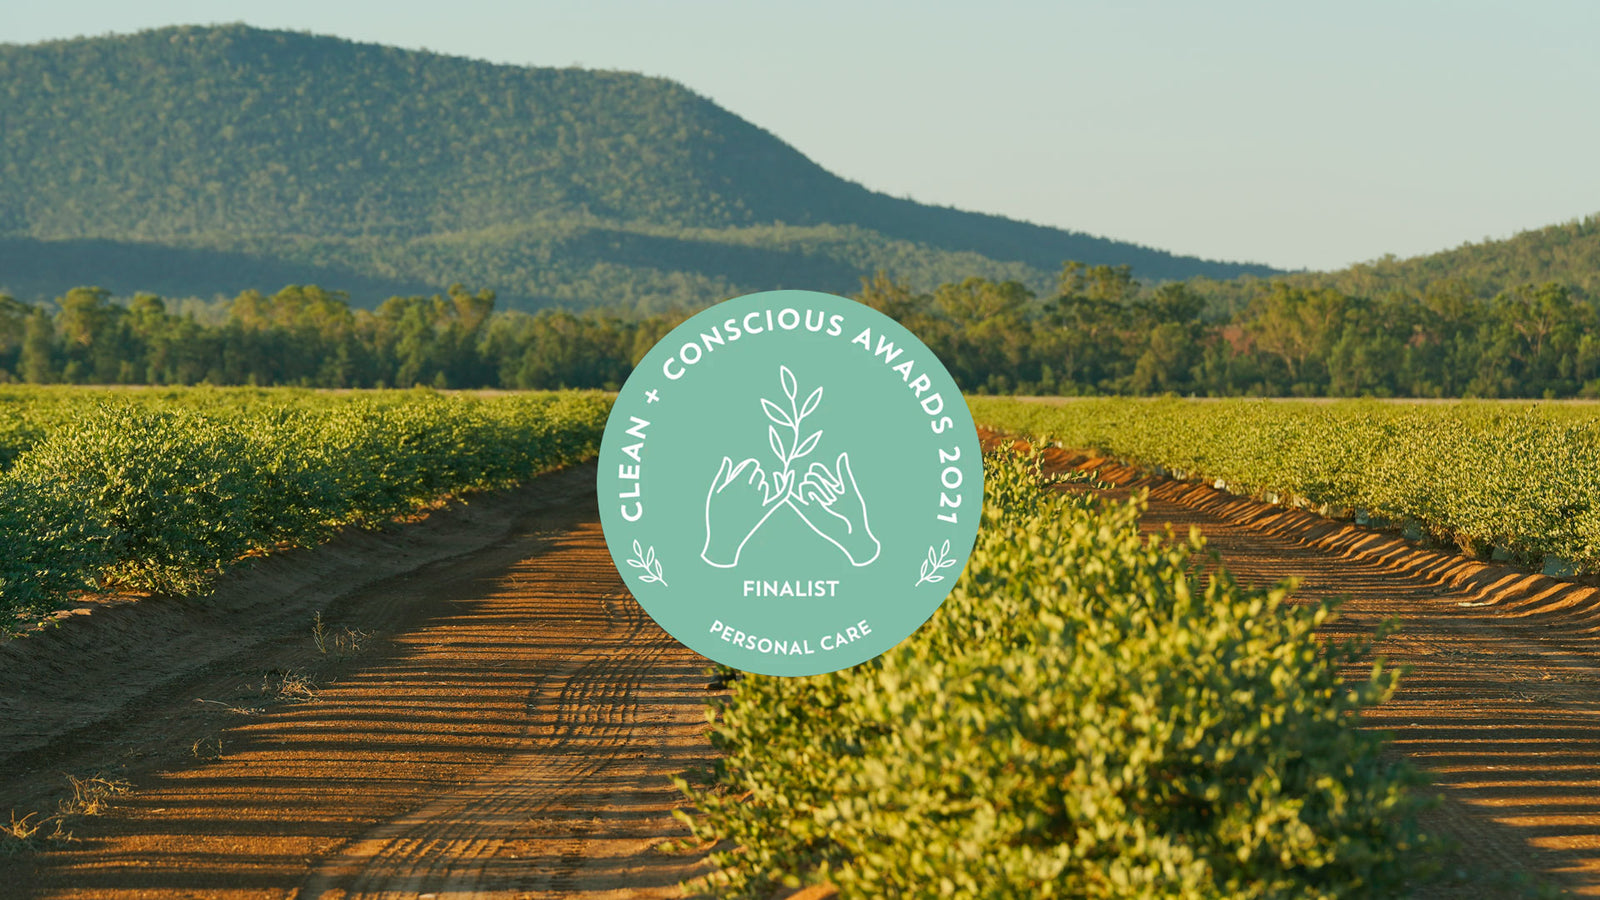 The Jojoba Company is Finalist of Clean & Conscious Awards